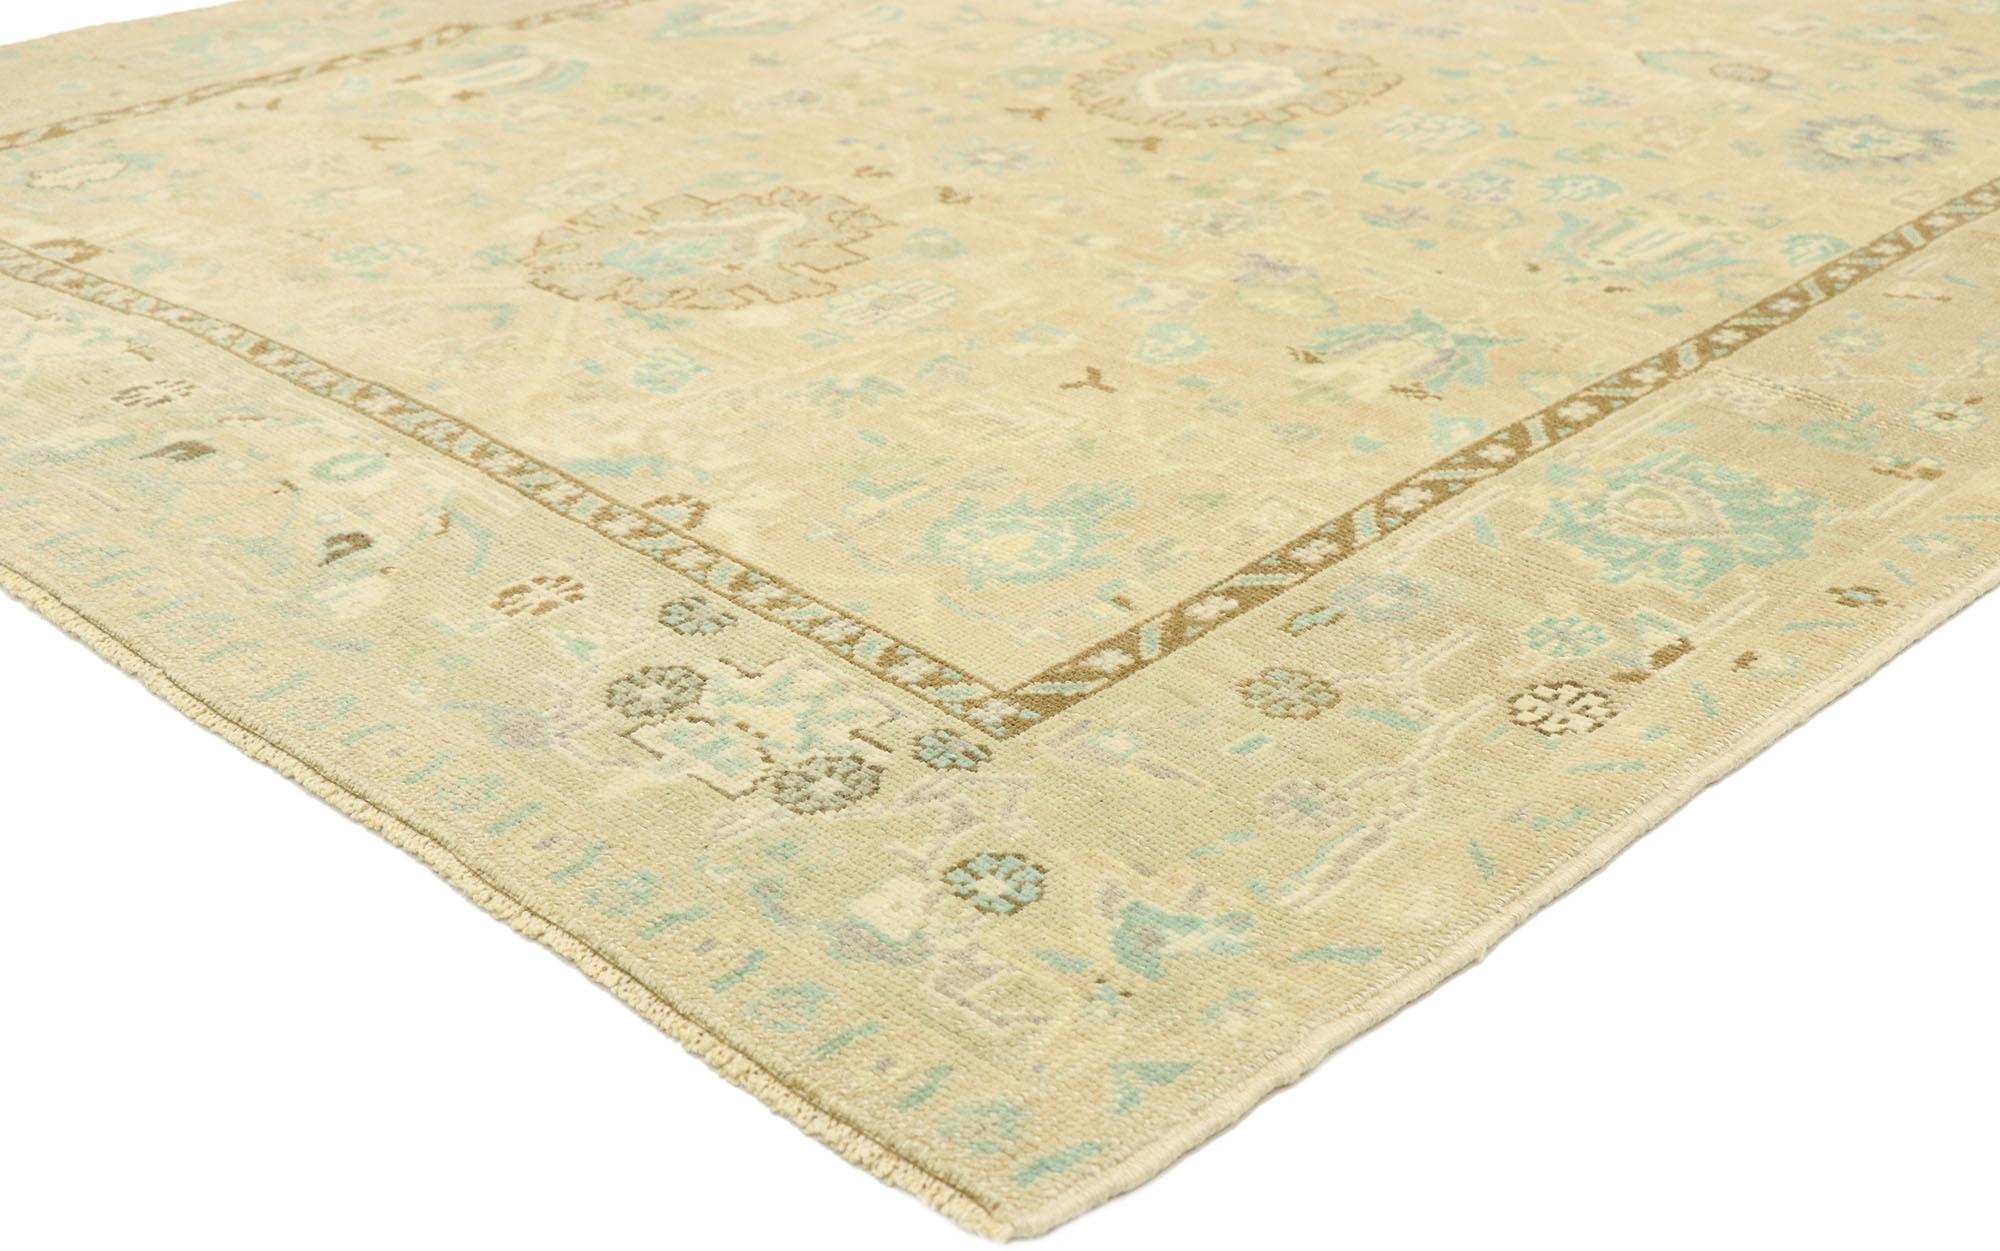 52959 vintage Turkish Oushak rug with Swedish Gustavian Cottage style. Balancing Swedish simplicity with Gustavian grace, this hand knotted wool vintage Turkish Oushak rug displays nostalgic charm and inimitable warmth. The abrashed tan-ecru field